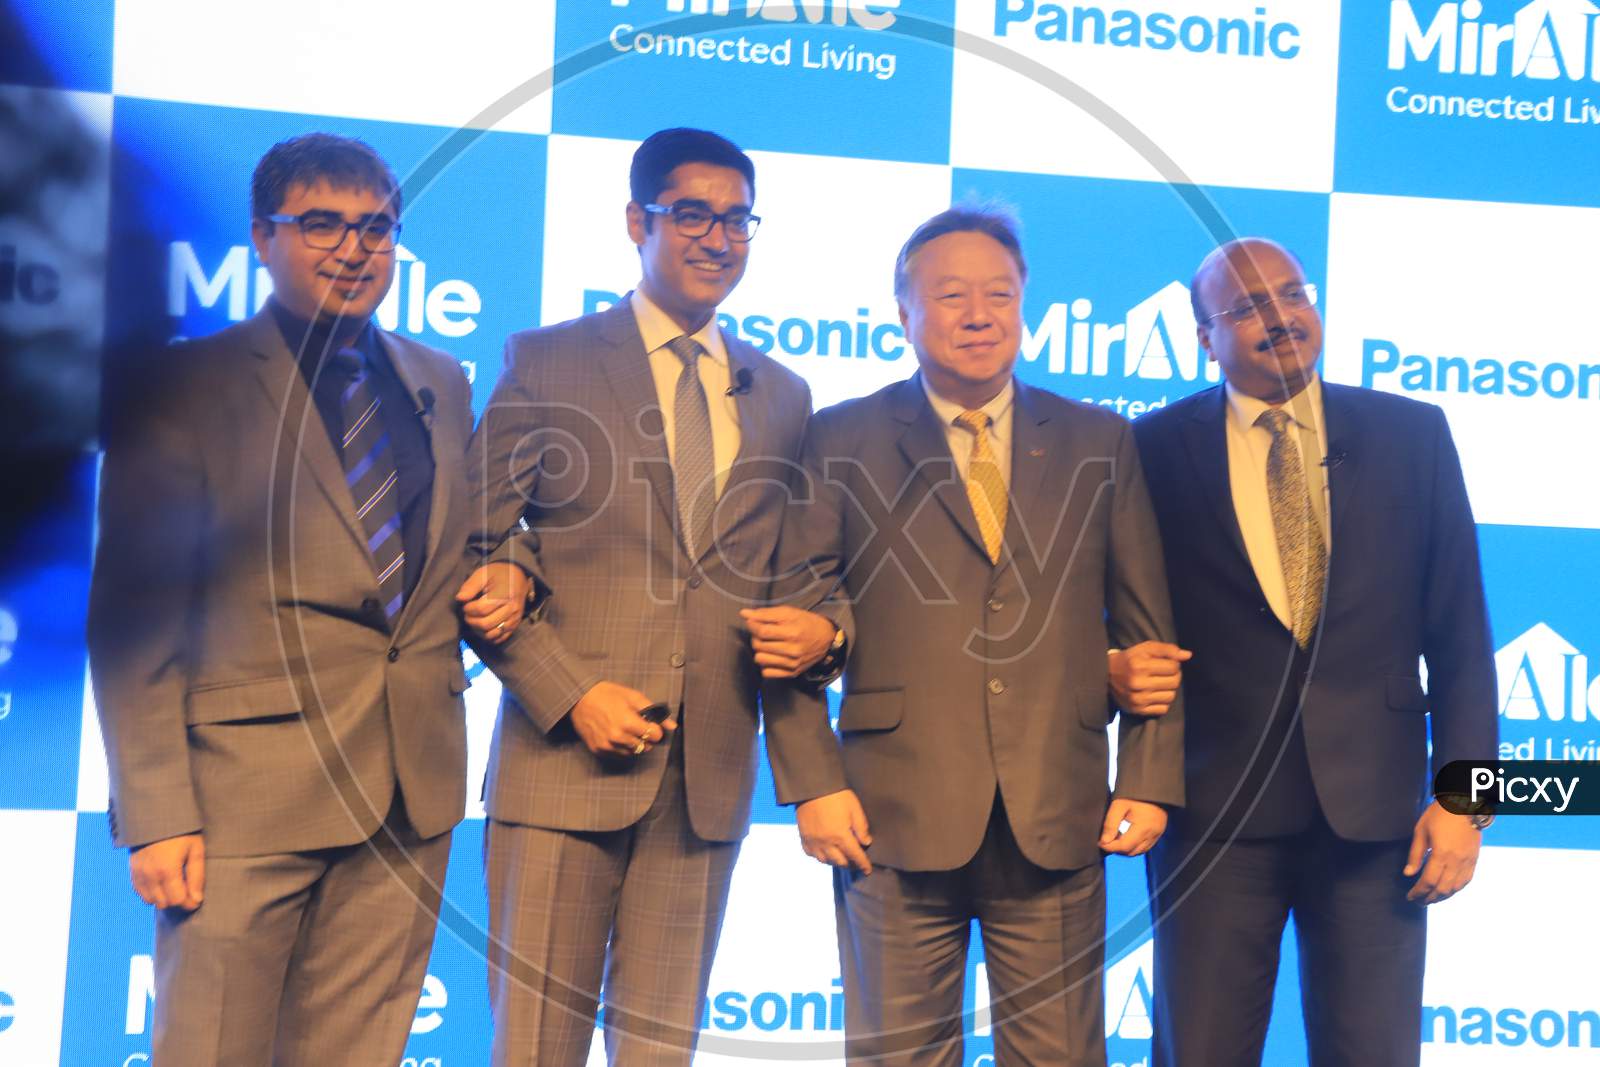 MirAIle Panasonic Launch Event With Dignitaries Present At The Event